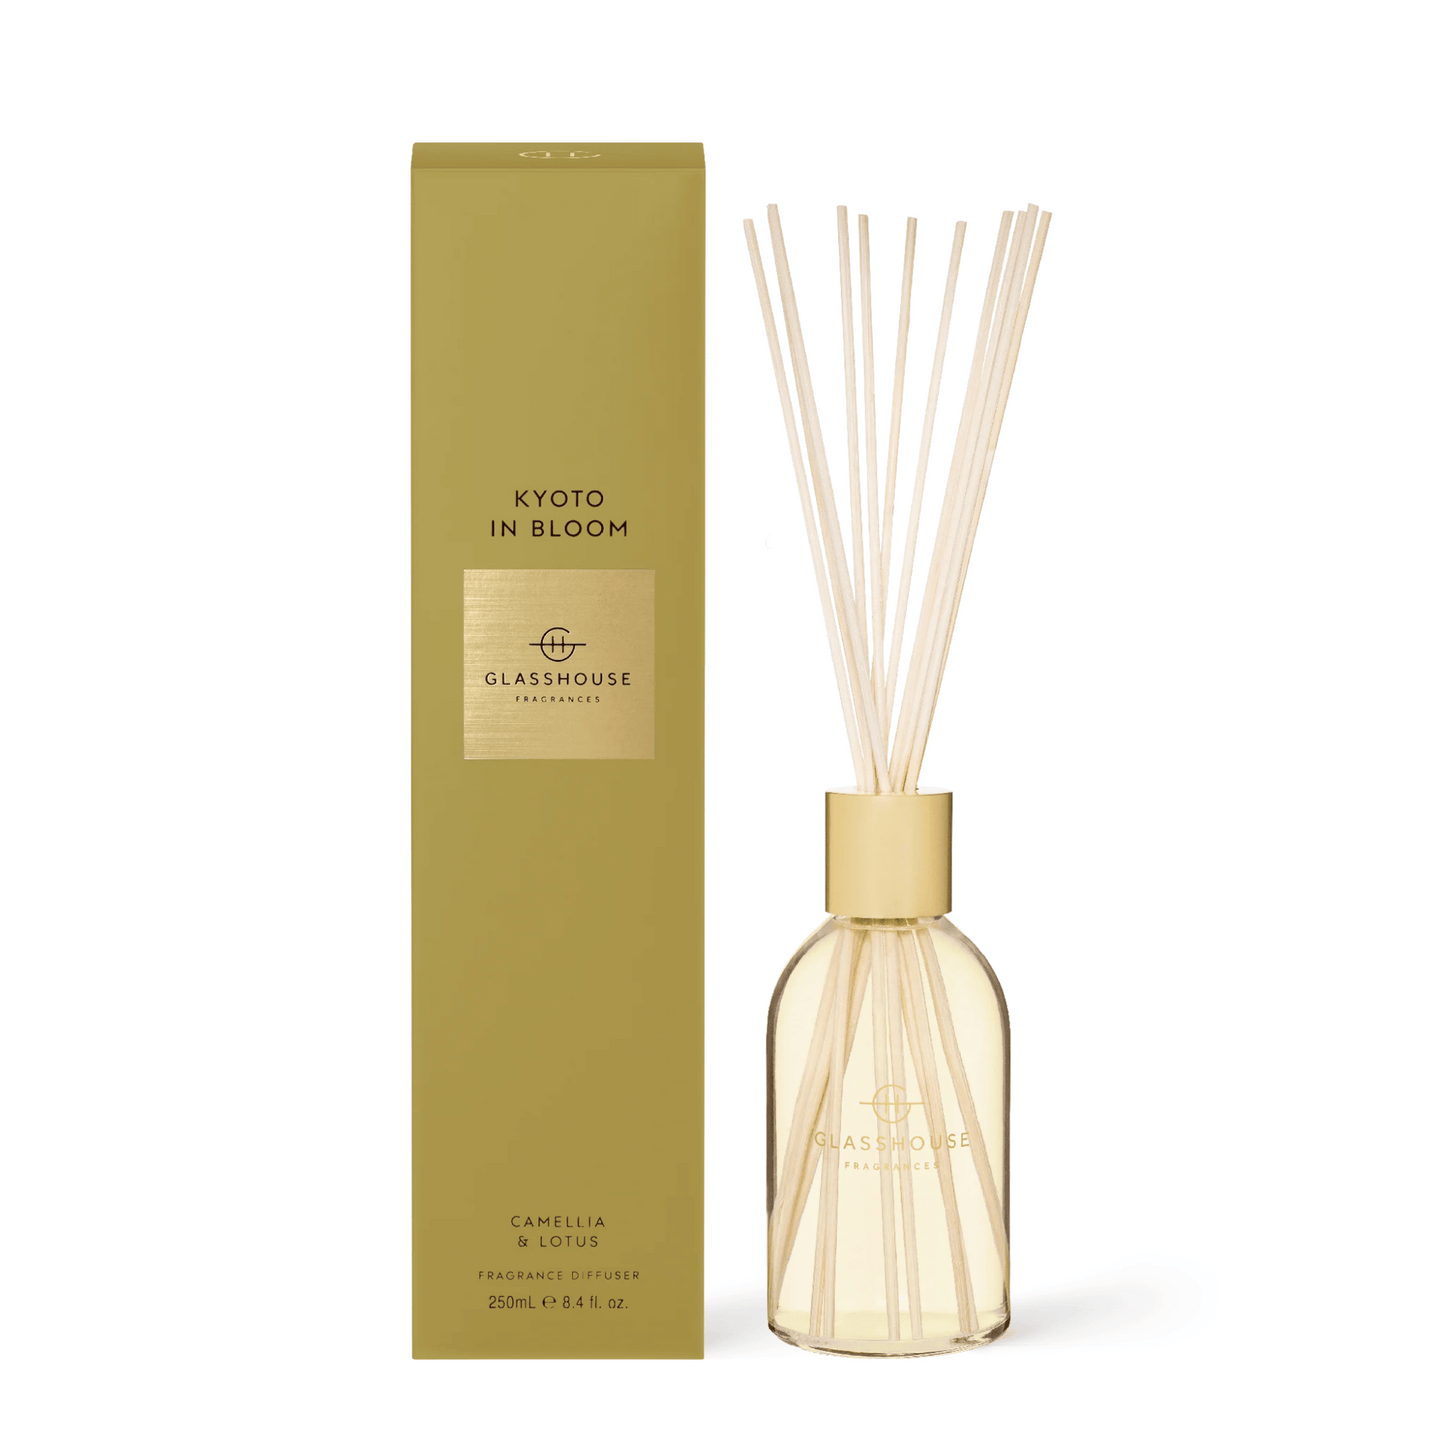 Primary Image of Kyoto In Bloom Diffuser